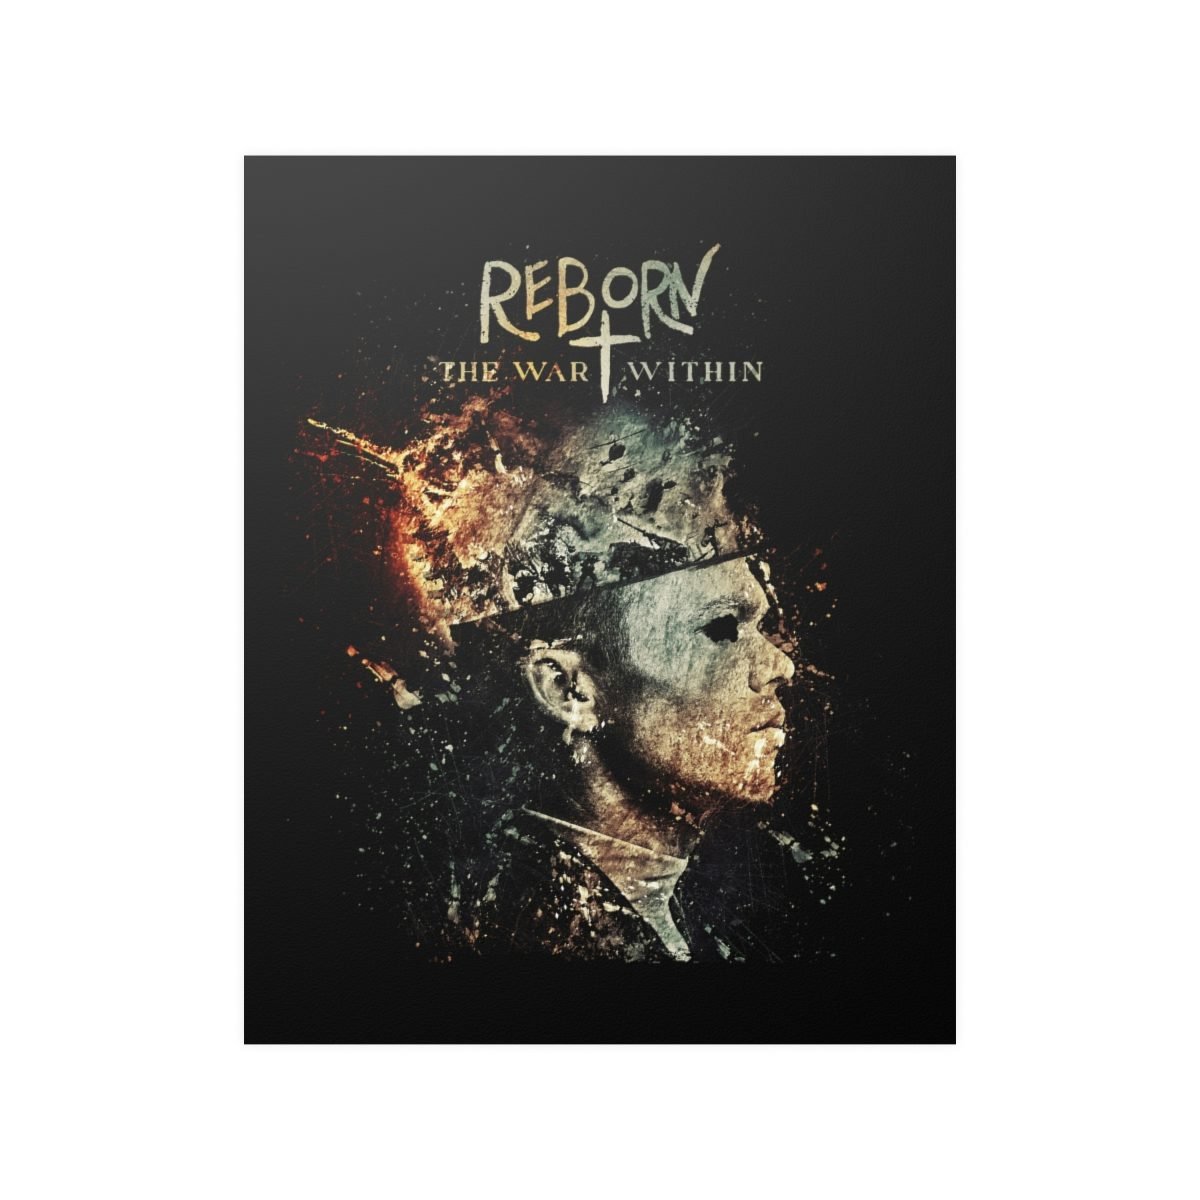 Reborn – The War Within posters